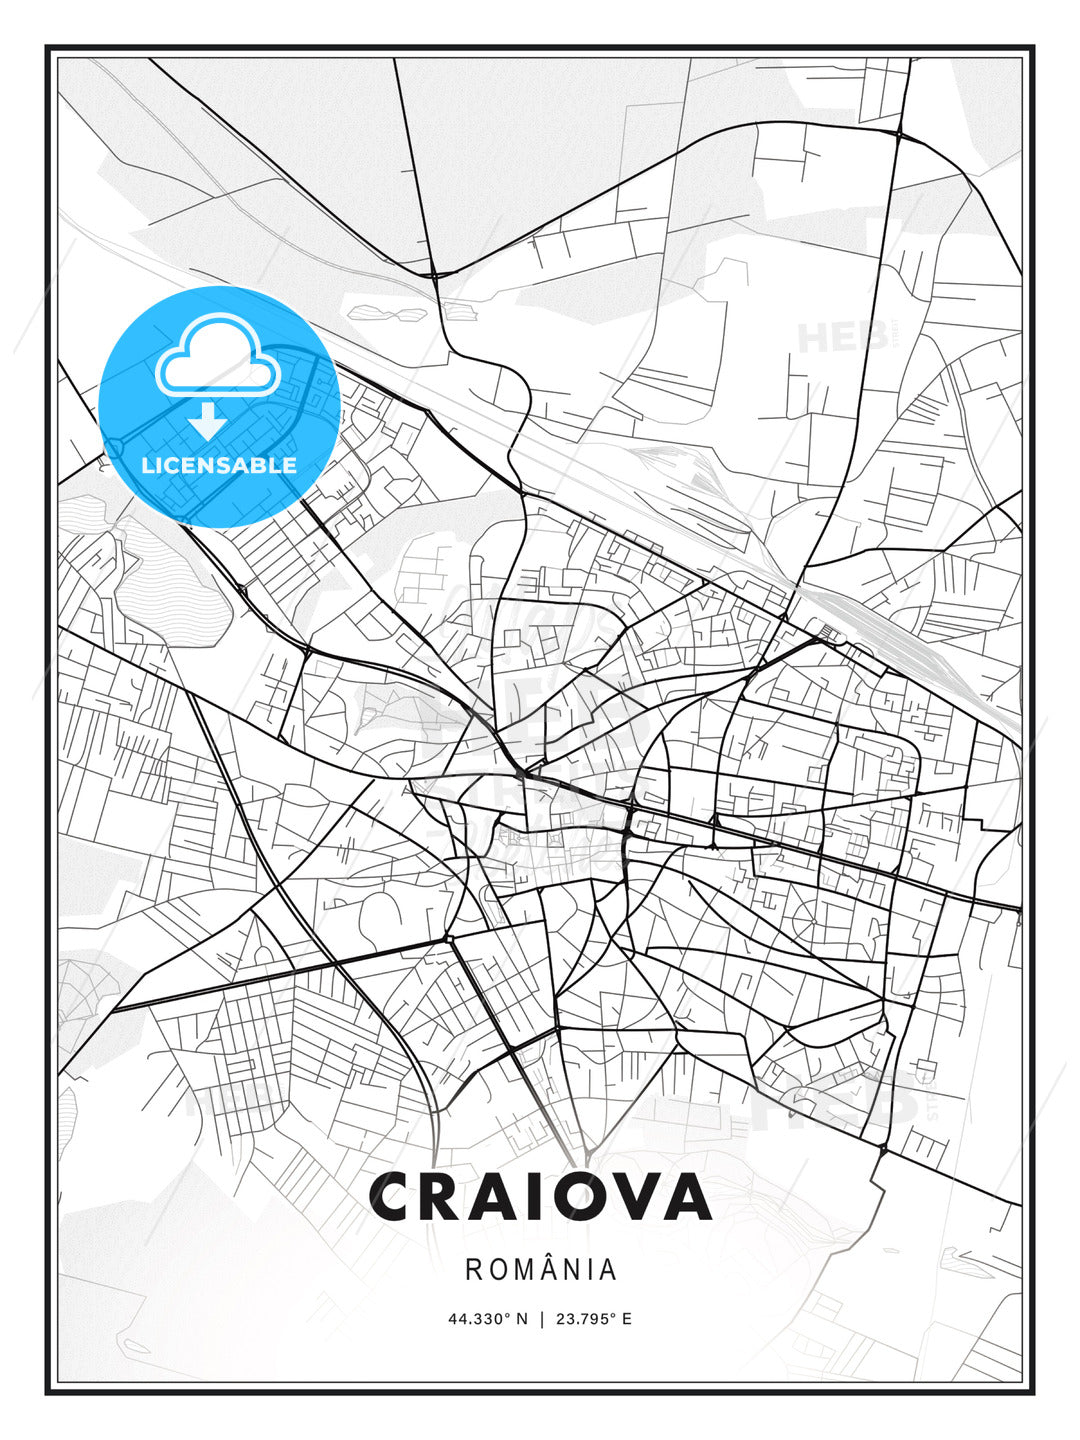 Craiova, Romania, Modern Print Template in Various Formats - HEBSTREITS Sketches